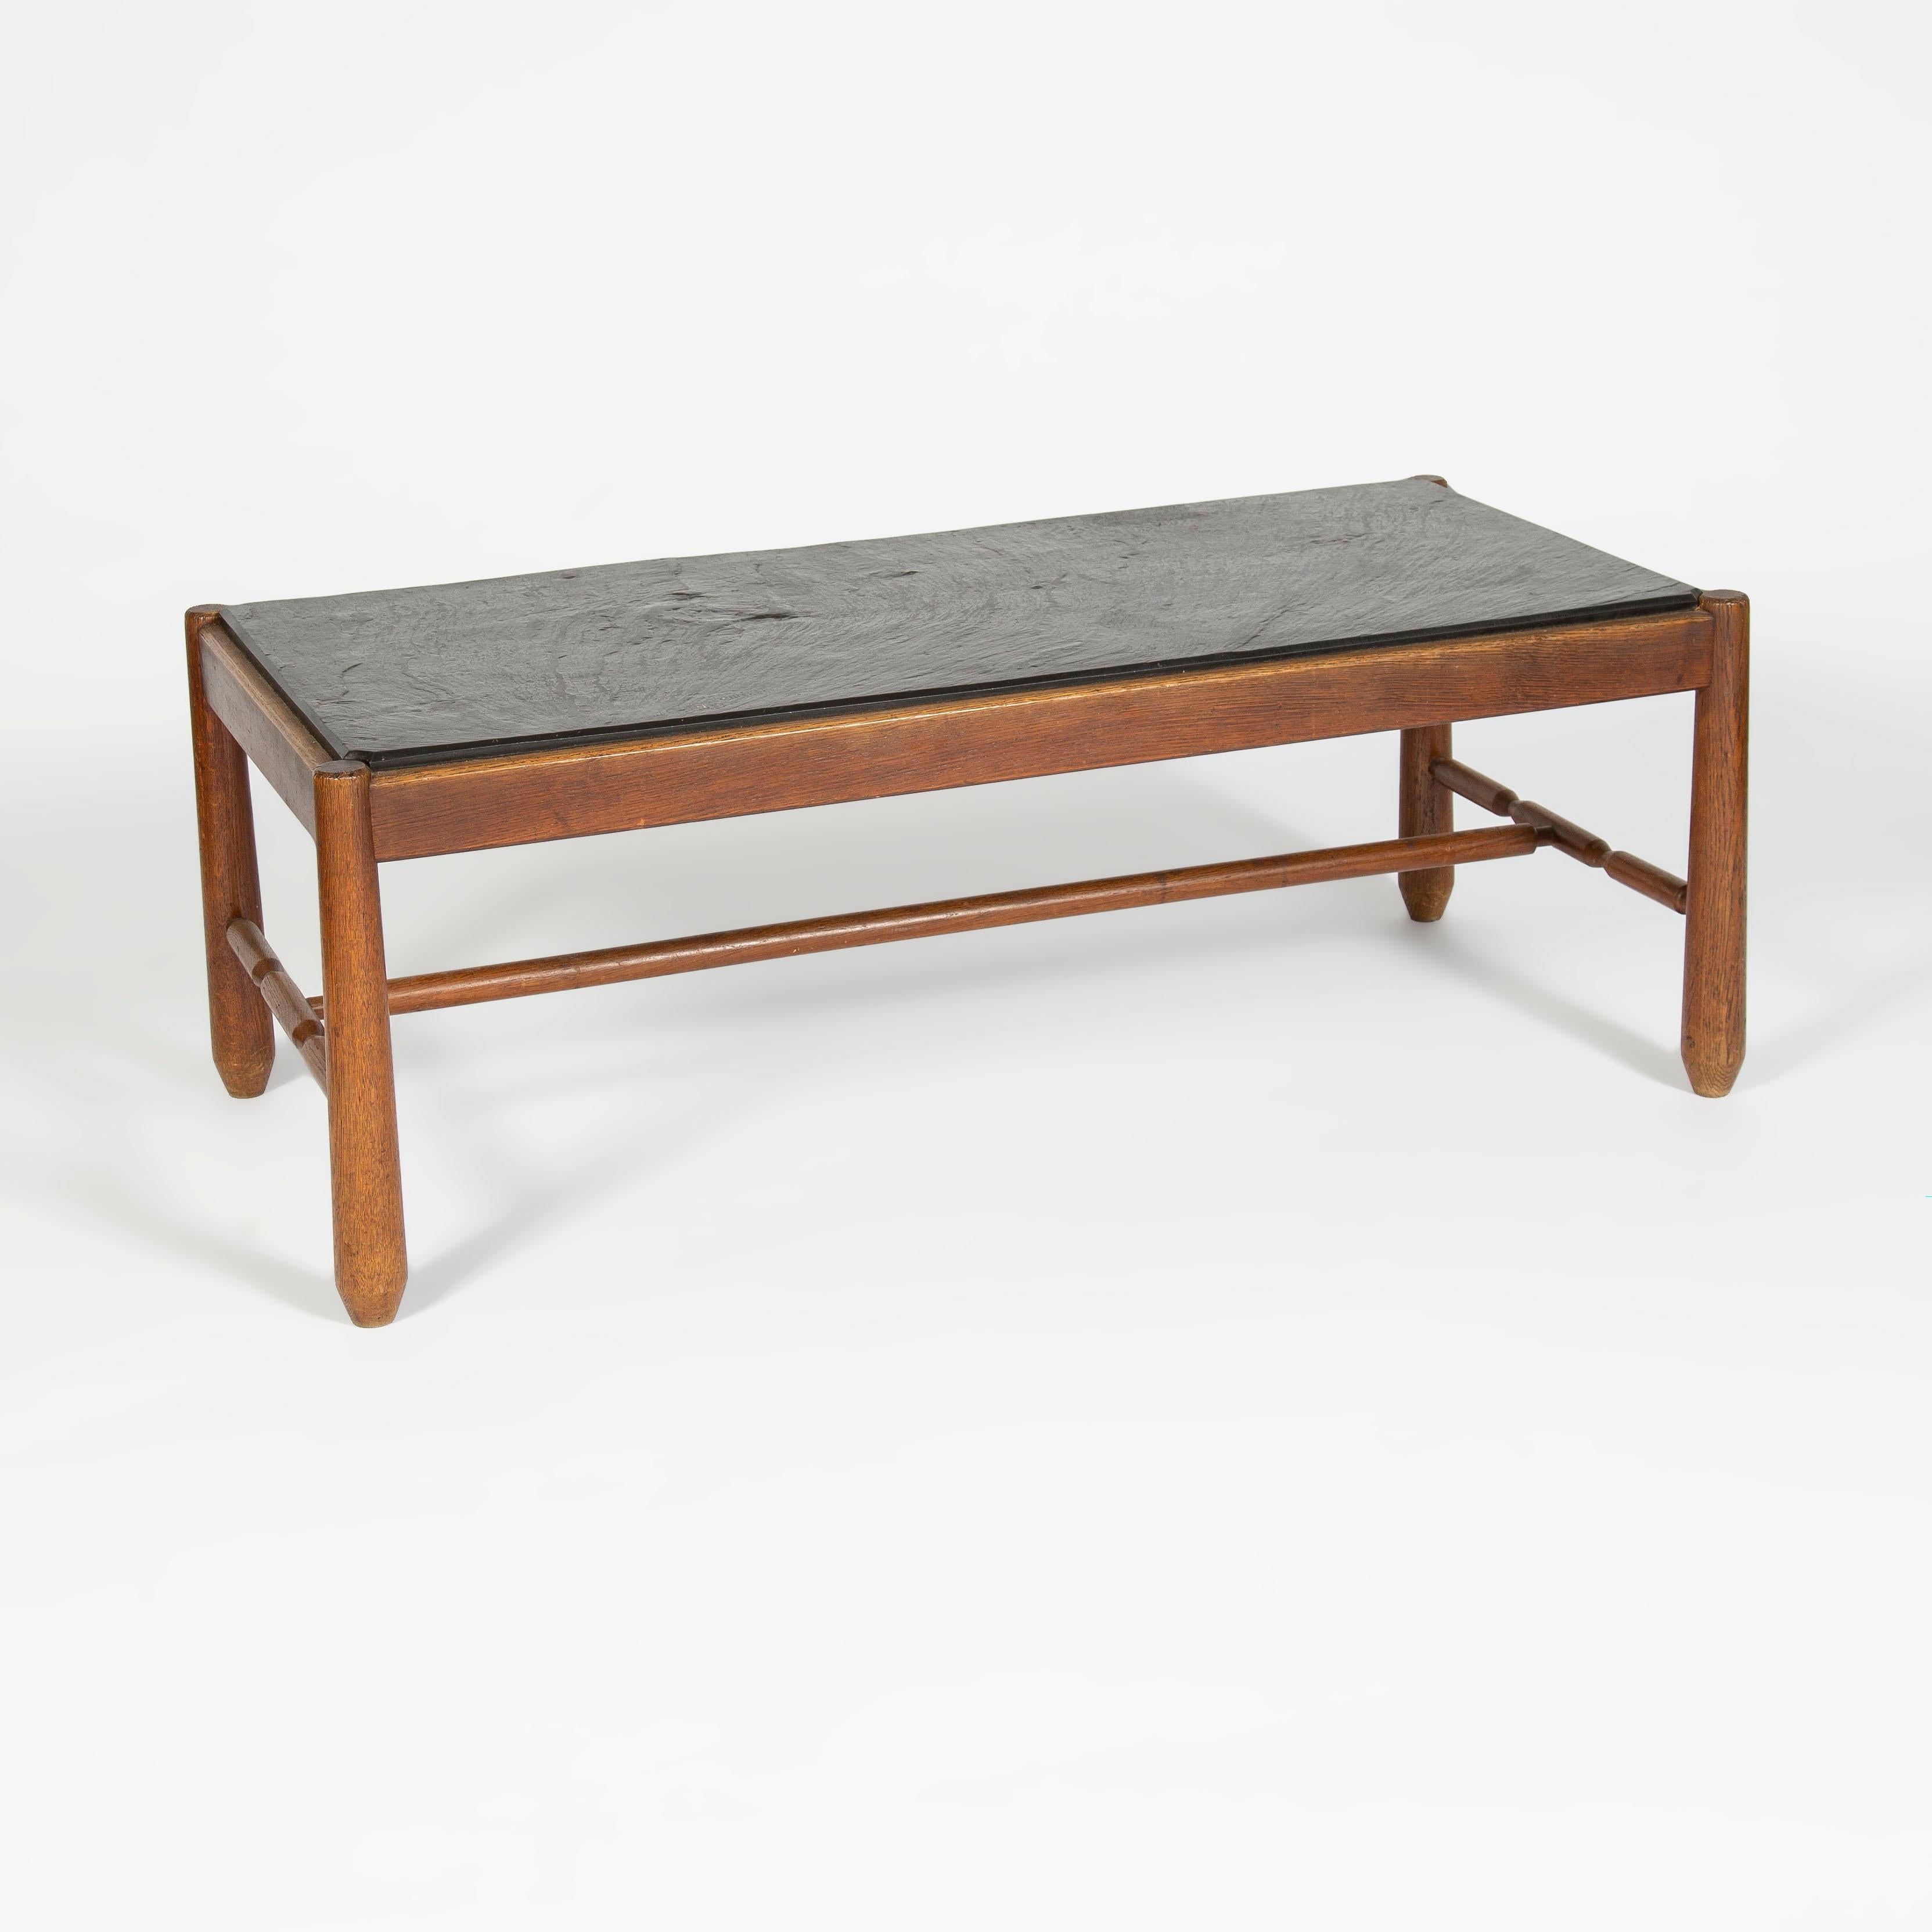 Rectangular coffee table with a rectangular teak frame with notch cut details. The top is made from a solid piece of dark color slate set in to the framework.